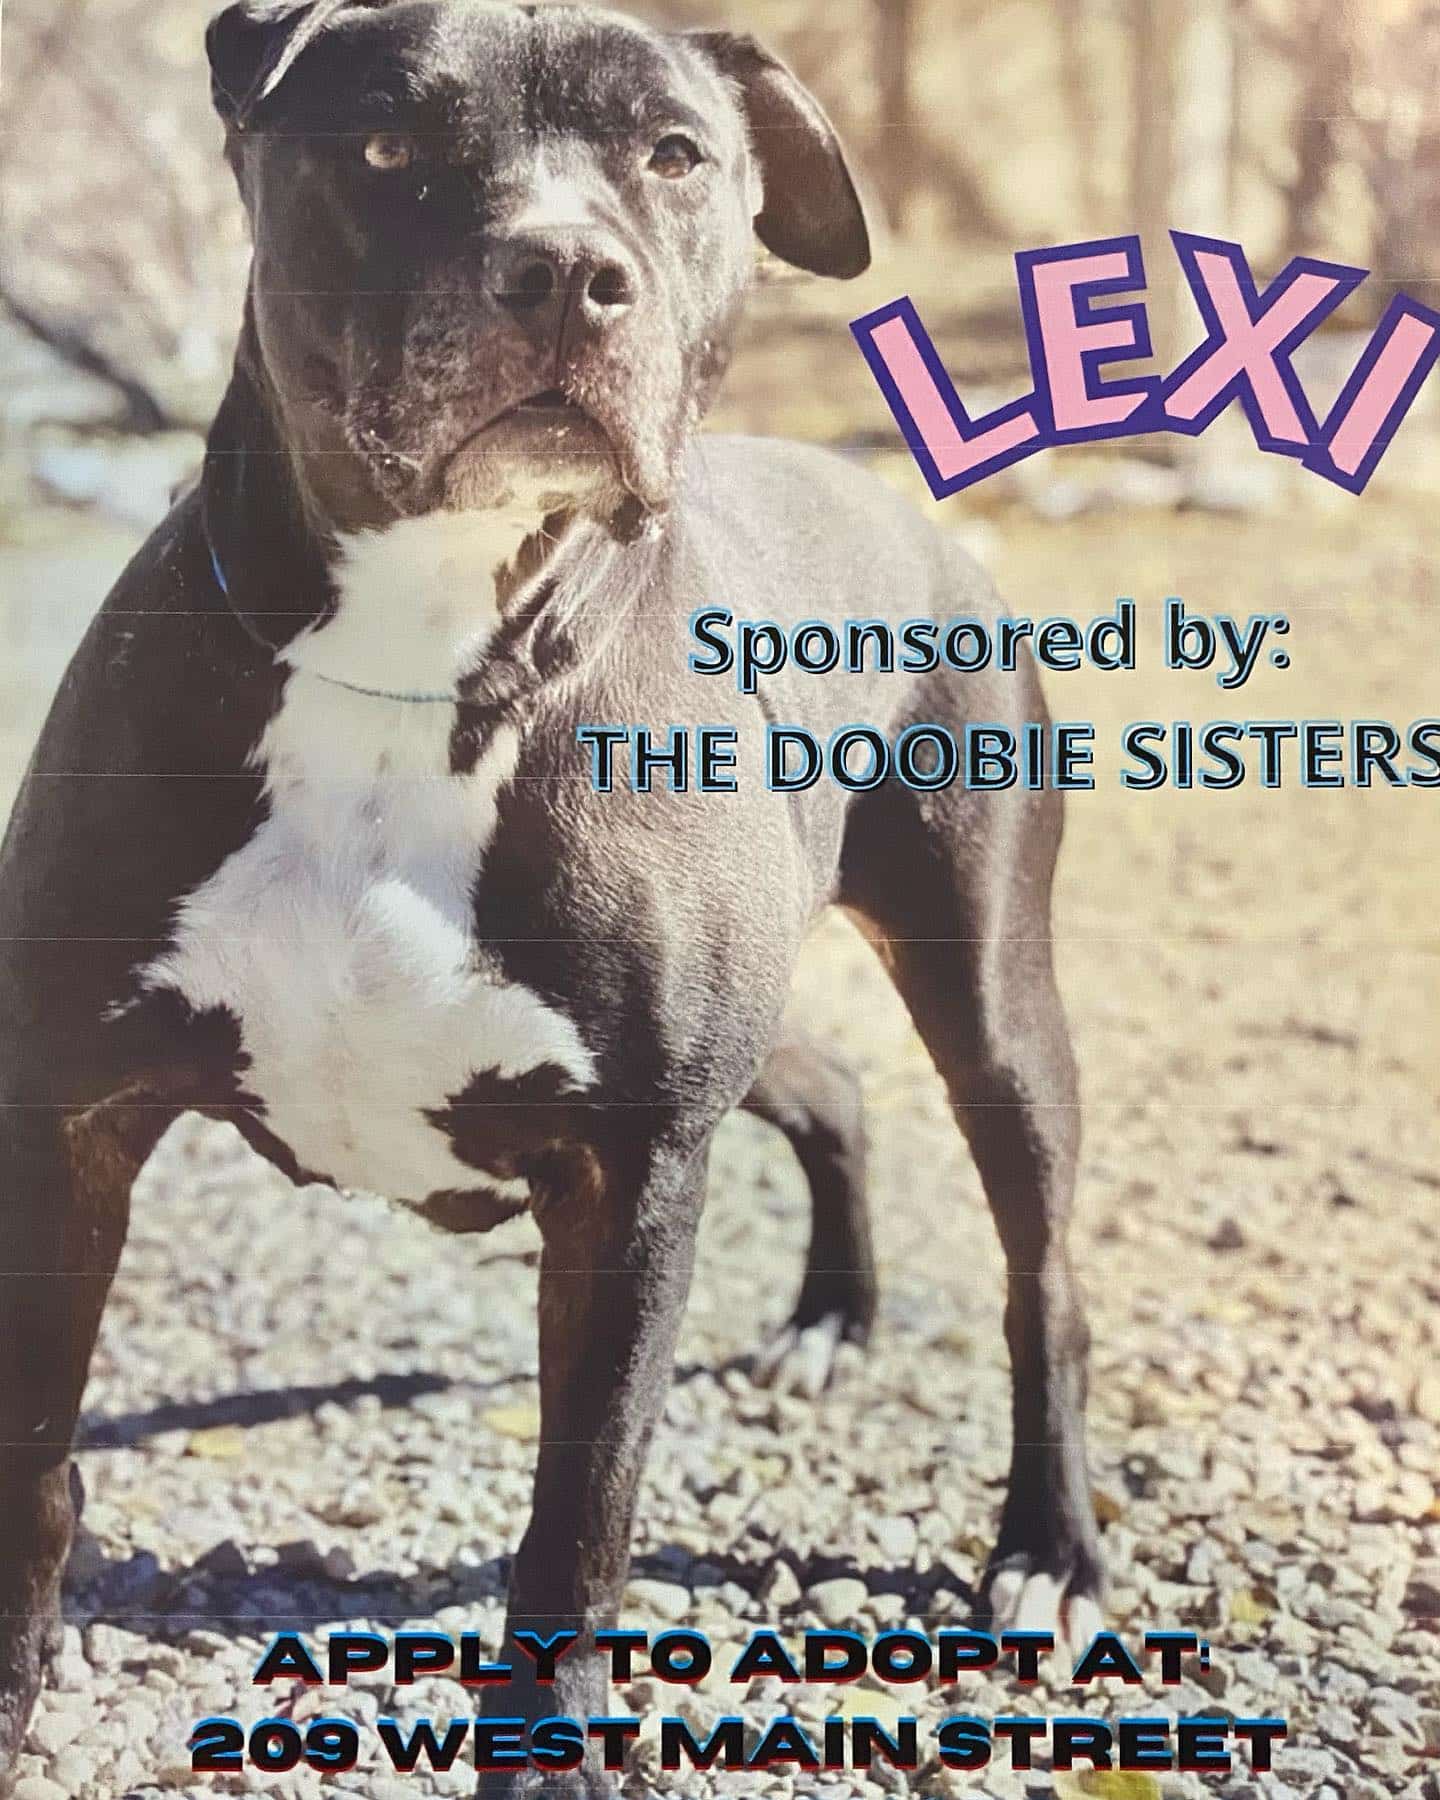 This holiday season we have agreed to partner with @denkaianimalsanctuary and sponsor miss Lexi in her search for her Fur-ever home! Is she not the cutest thing?! Stay tuned for updates on Lexi’s journey. #doobiedog #foreverhome #dogsarethebest